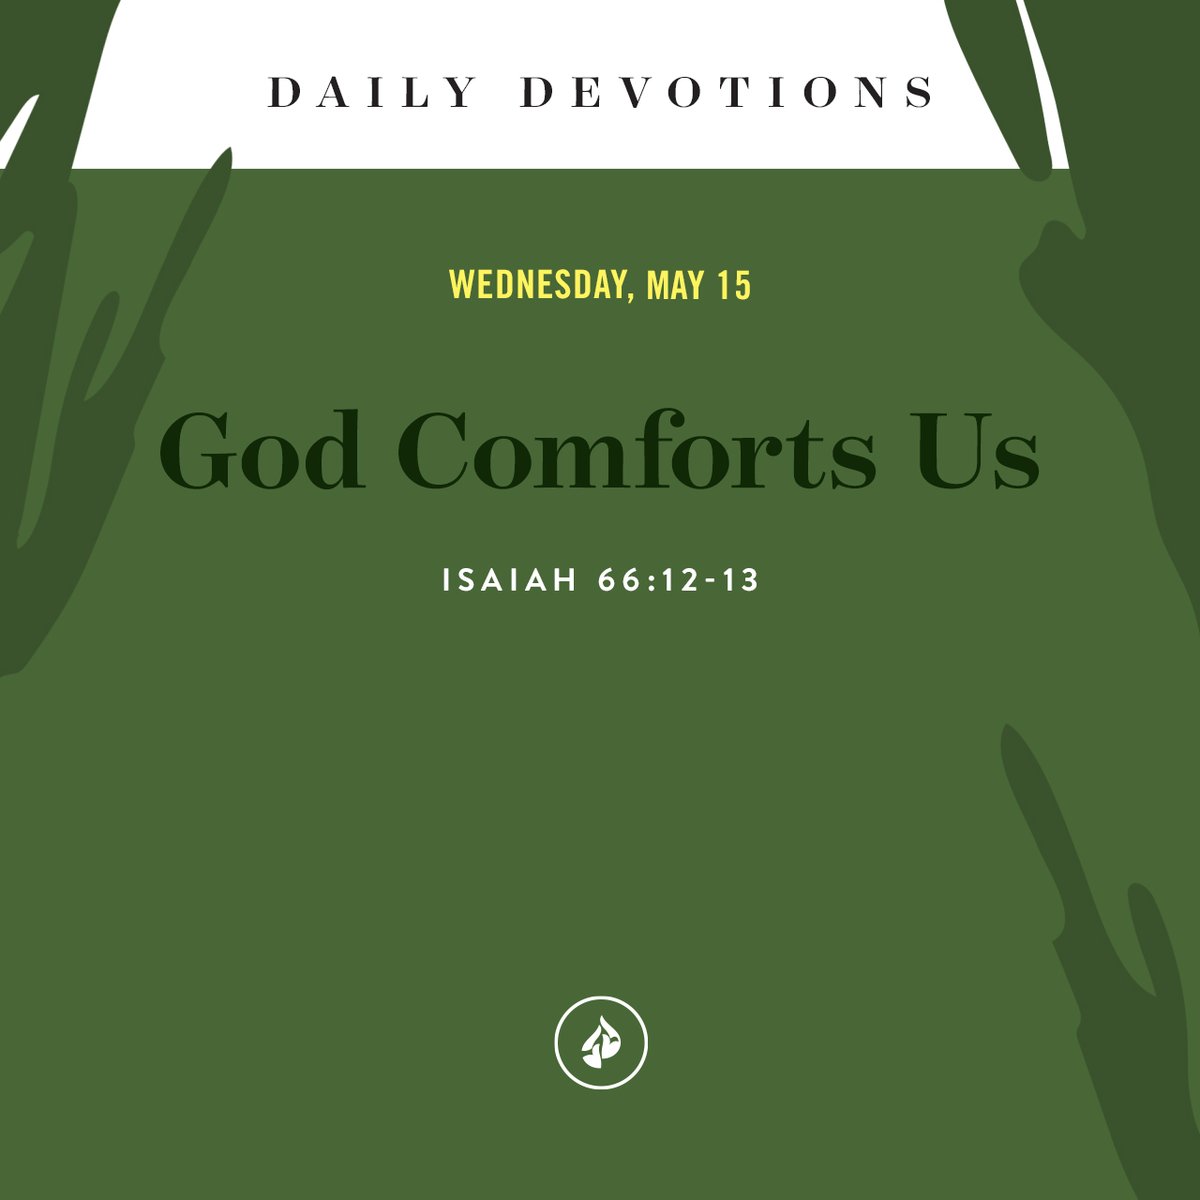 Distractions offer only temporary relief from pain; in contrast, our heavenly Father promises healing.  #DailyDevo
intouch.org/read/daily-dev…